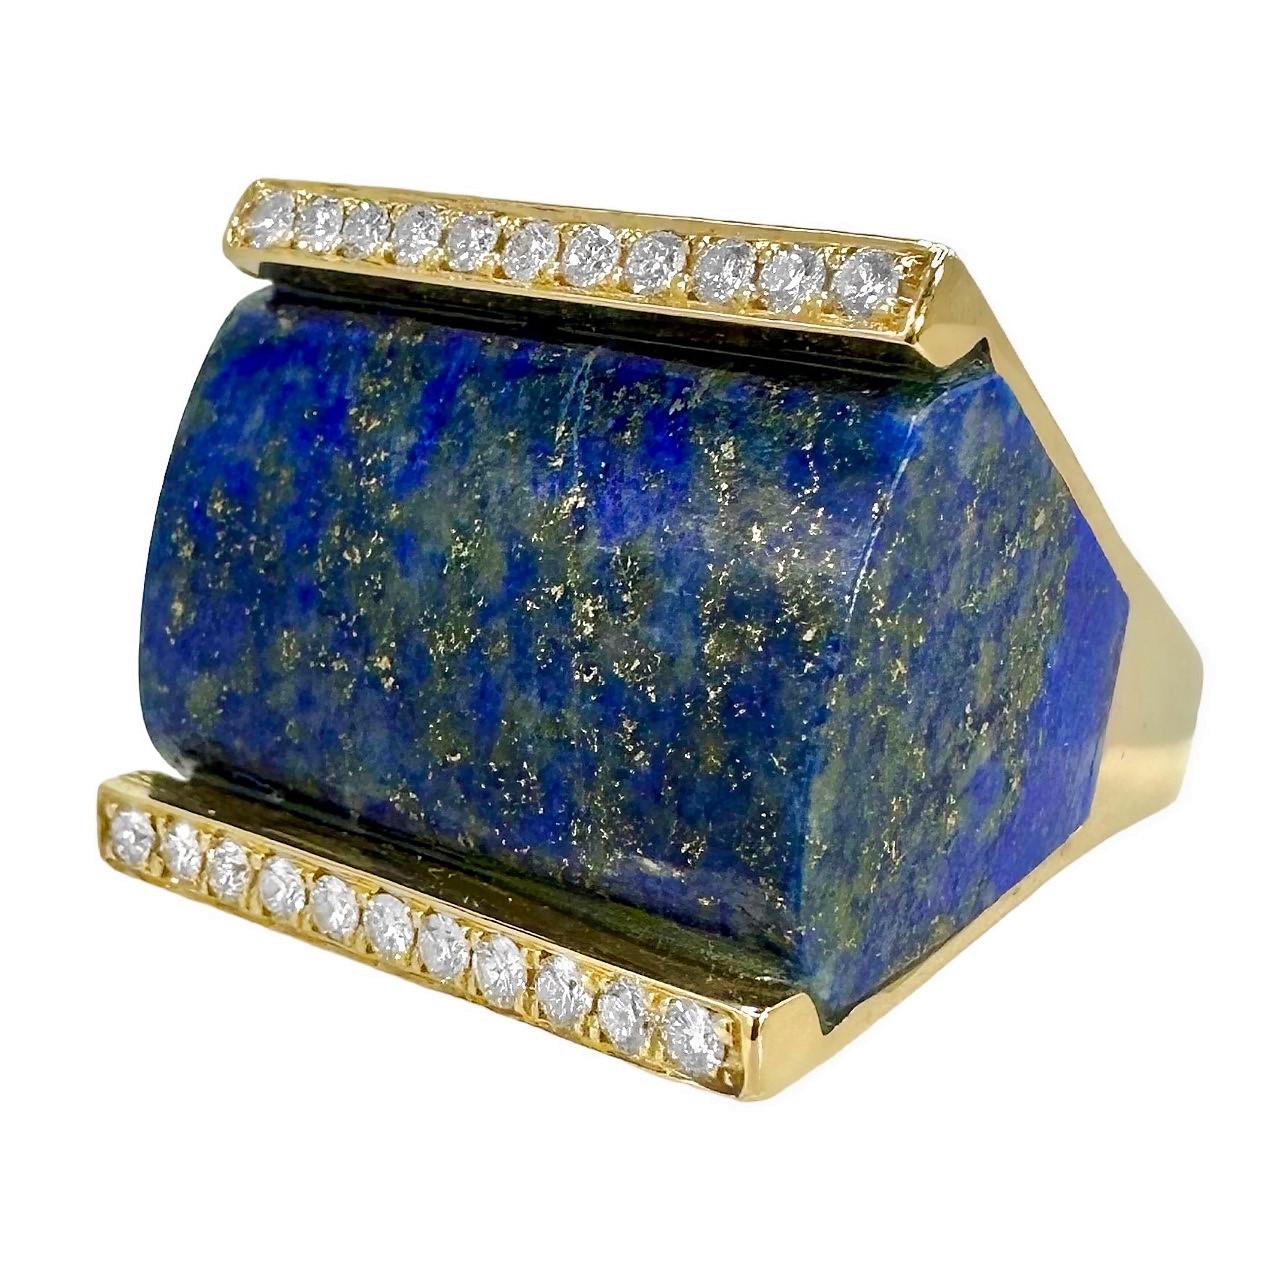 The striking piece of lapis-lazuli, which is custom cut into the ring, is slightly bombe on the top, and is flanked by a single line of fine diamonds on each side. This is a truly  exceptional piece of jewelry, in scale as well as aesthetic appeal.